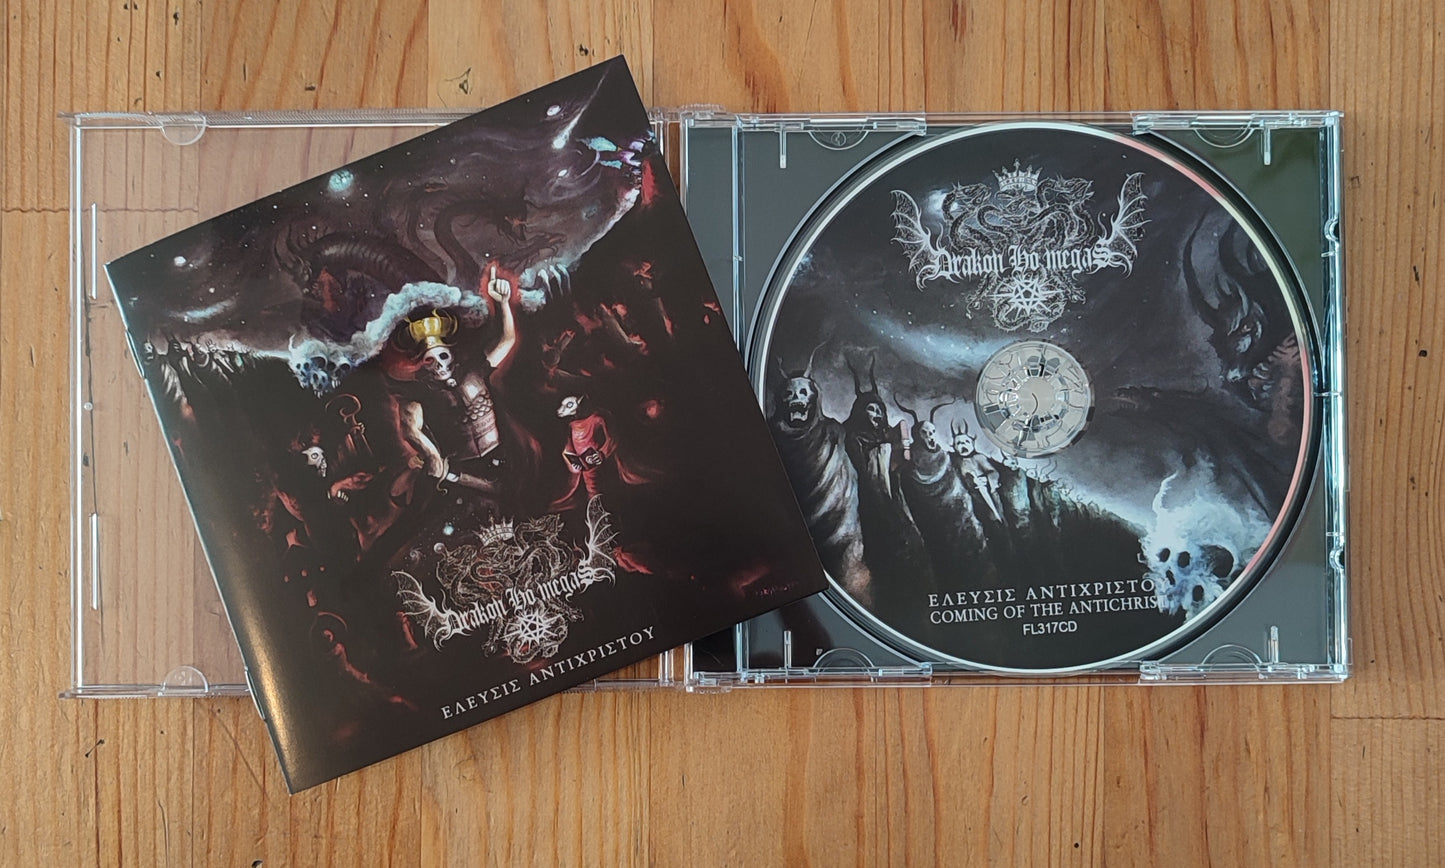 Drakon Ho Megas (Gre) "Coming Of The Antichrist" - CDs *NEW IN STOCK*